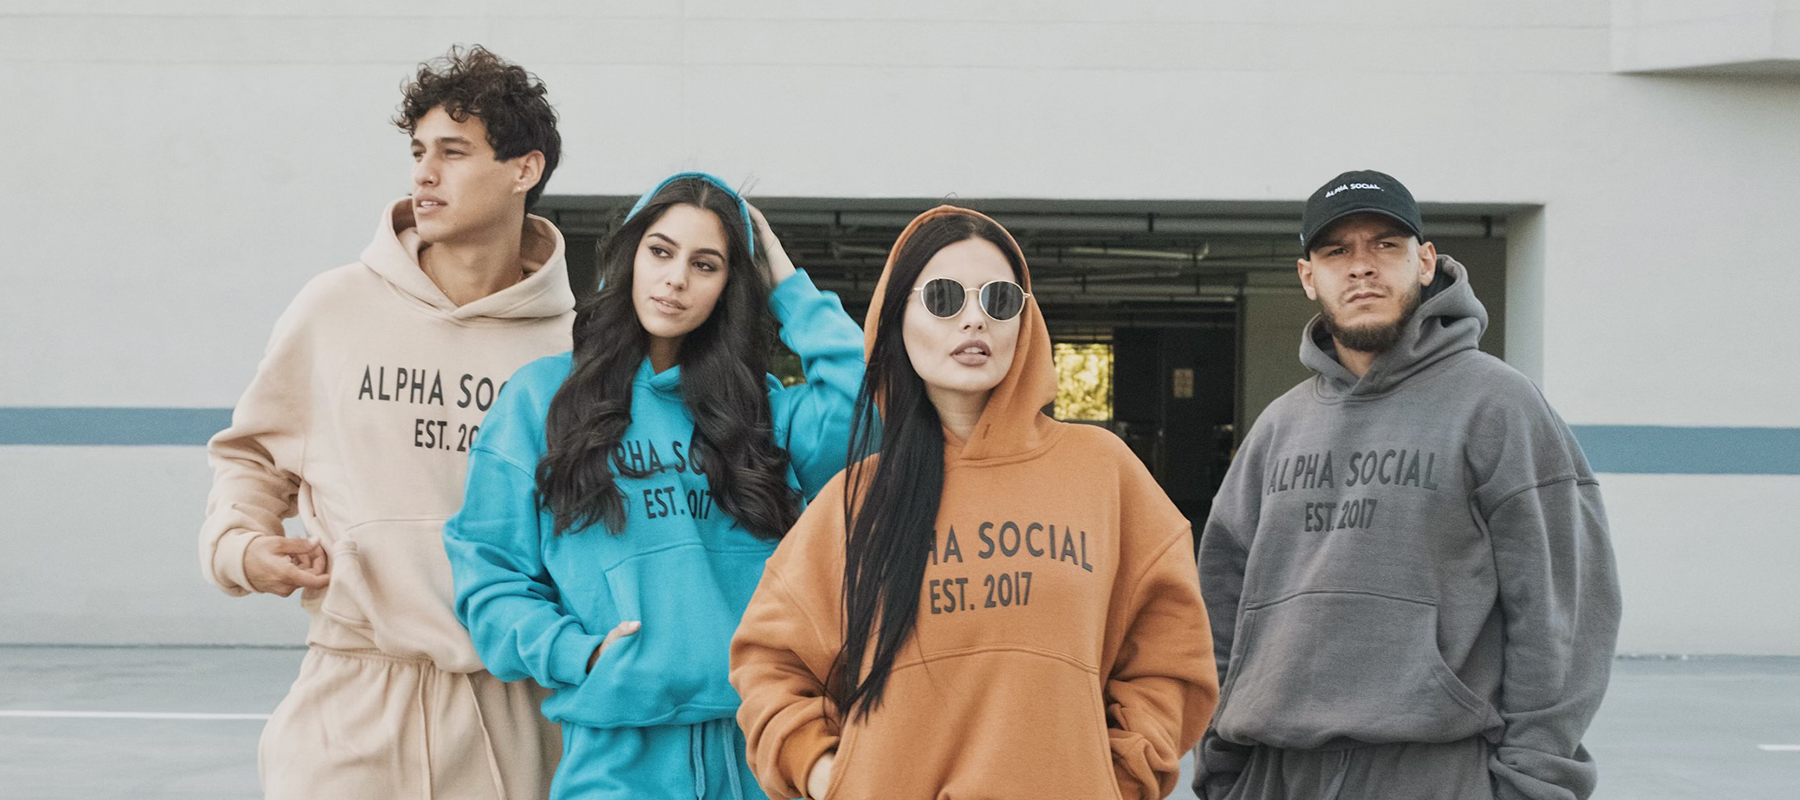 Alpha Social Clothing Brand is Building a Loyal Community of Leaders